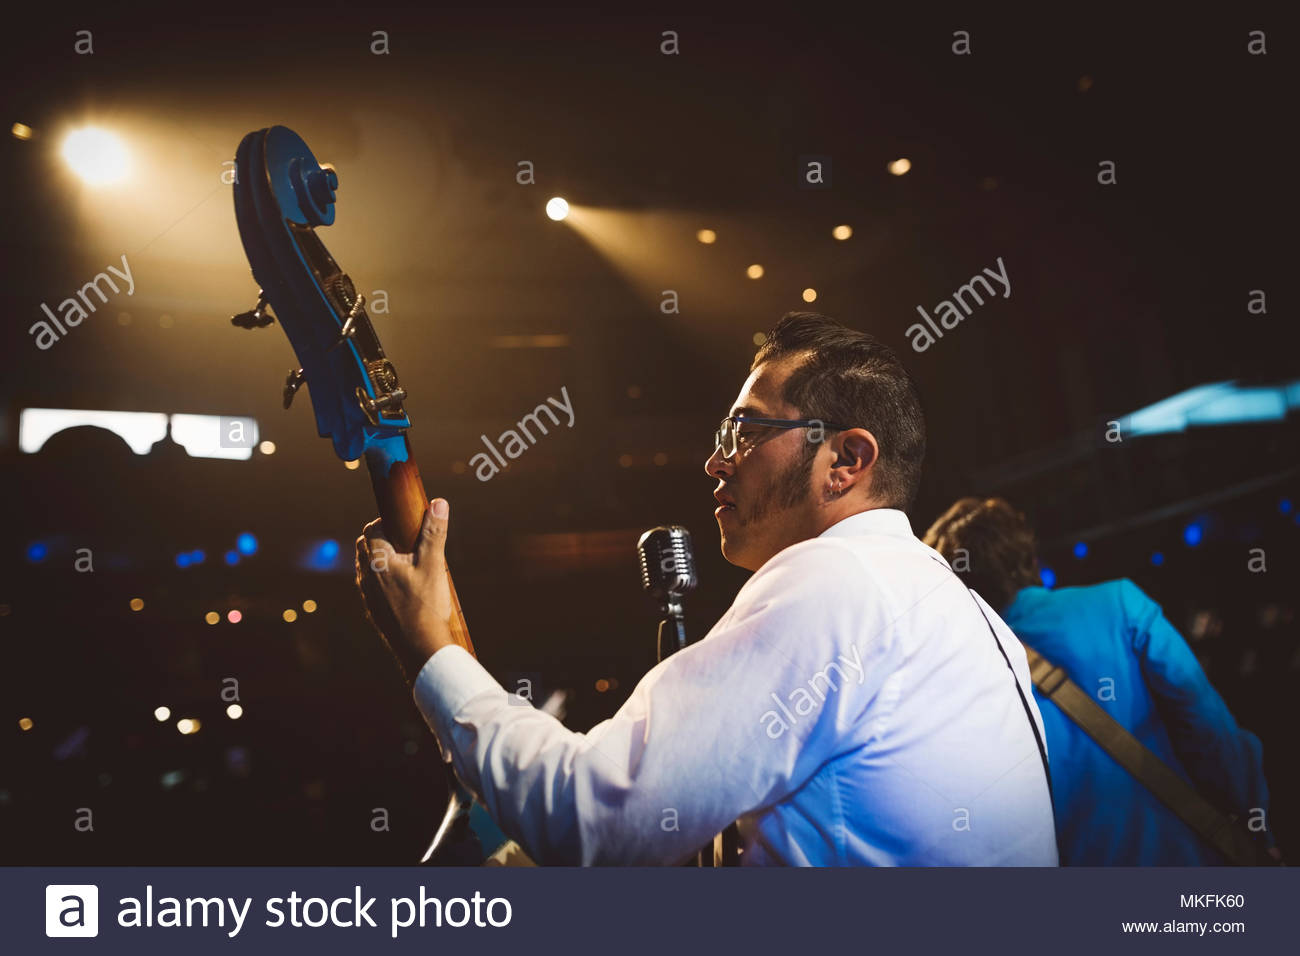 Rockabilly musician playing double bass on stage at music concert Stock Photo